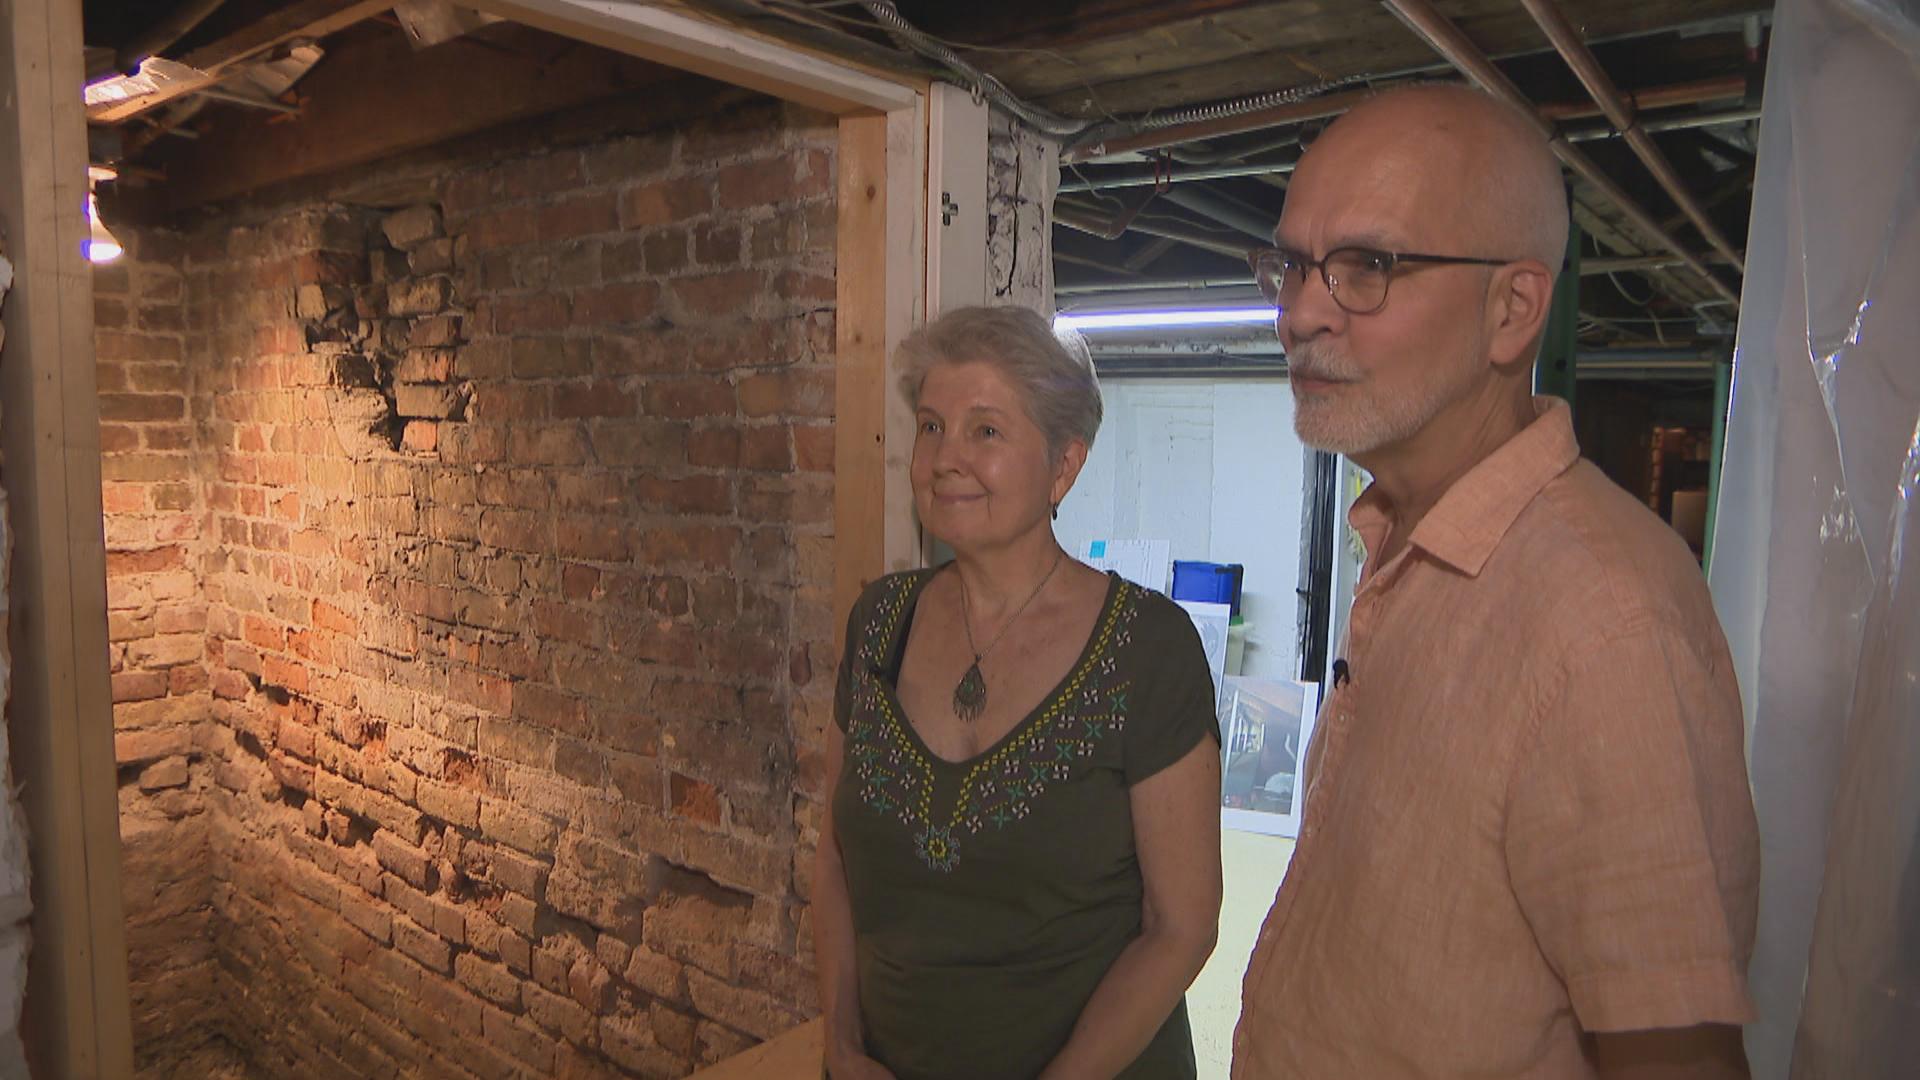 Could this strange brick room in Old Irving Park have been a station along the Underground Railroad more than 160 years ago? 